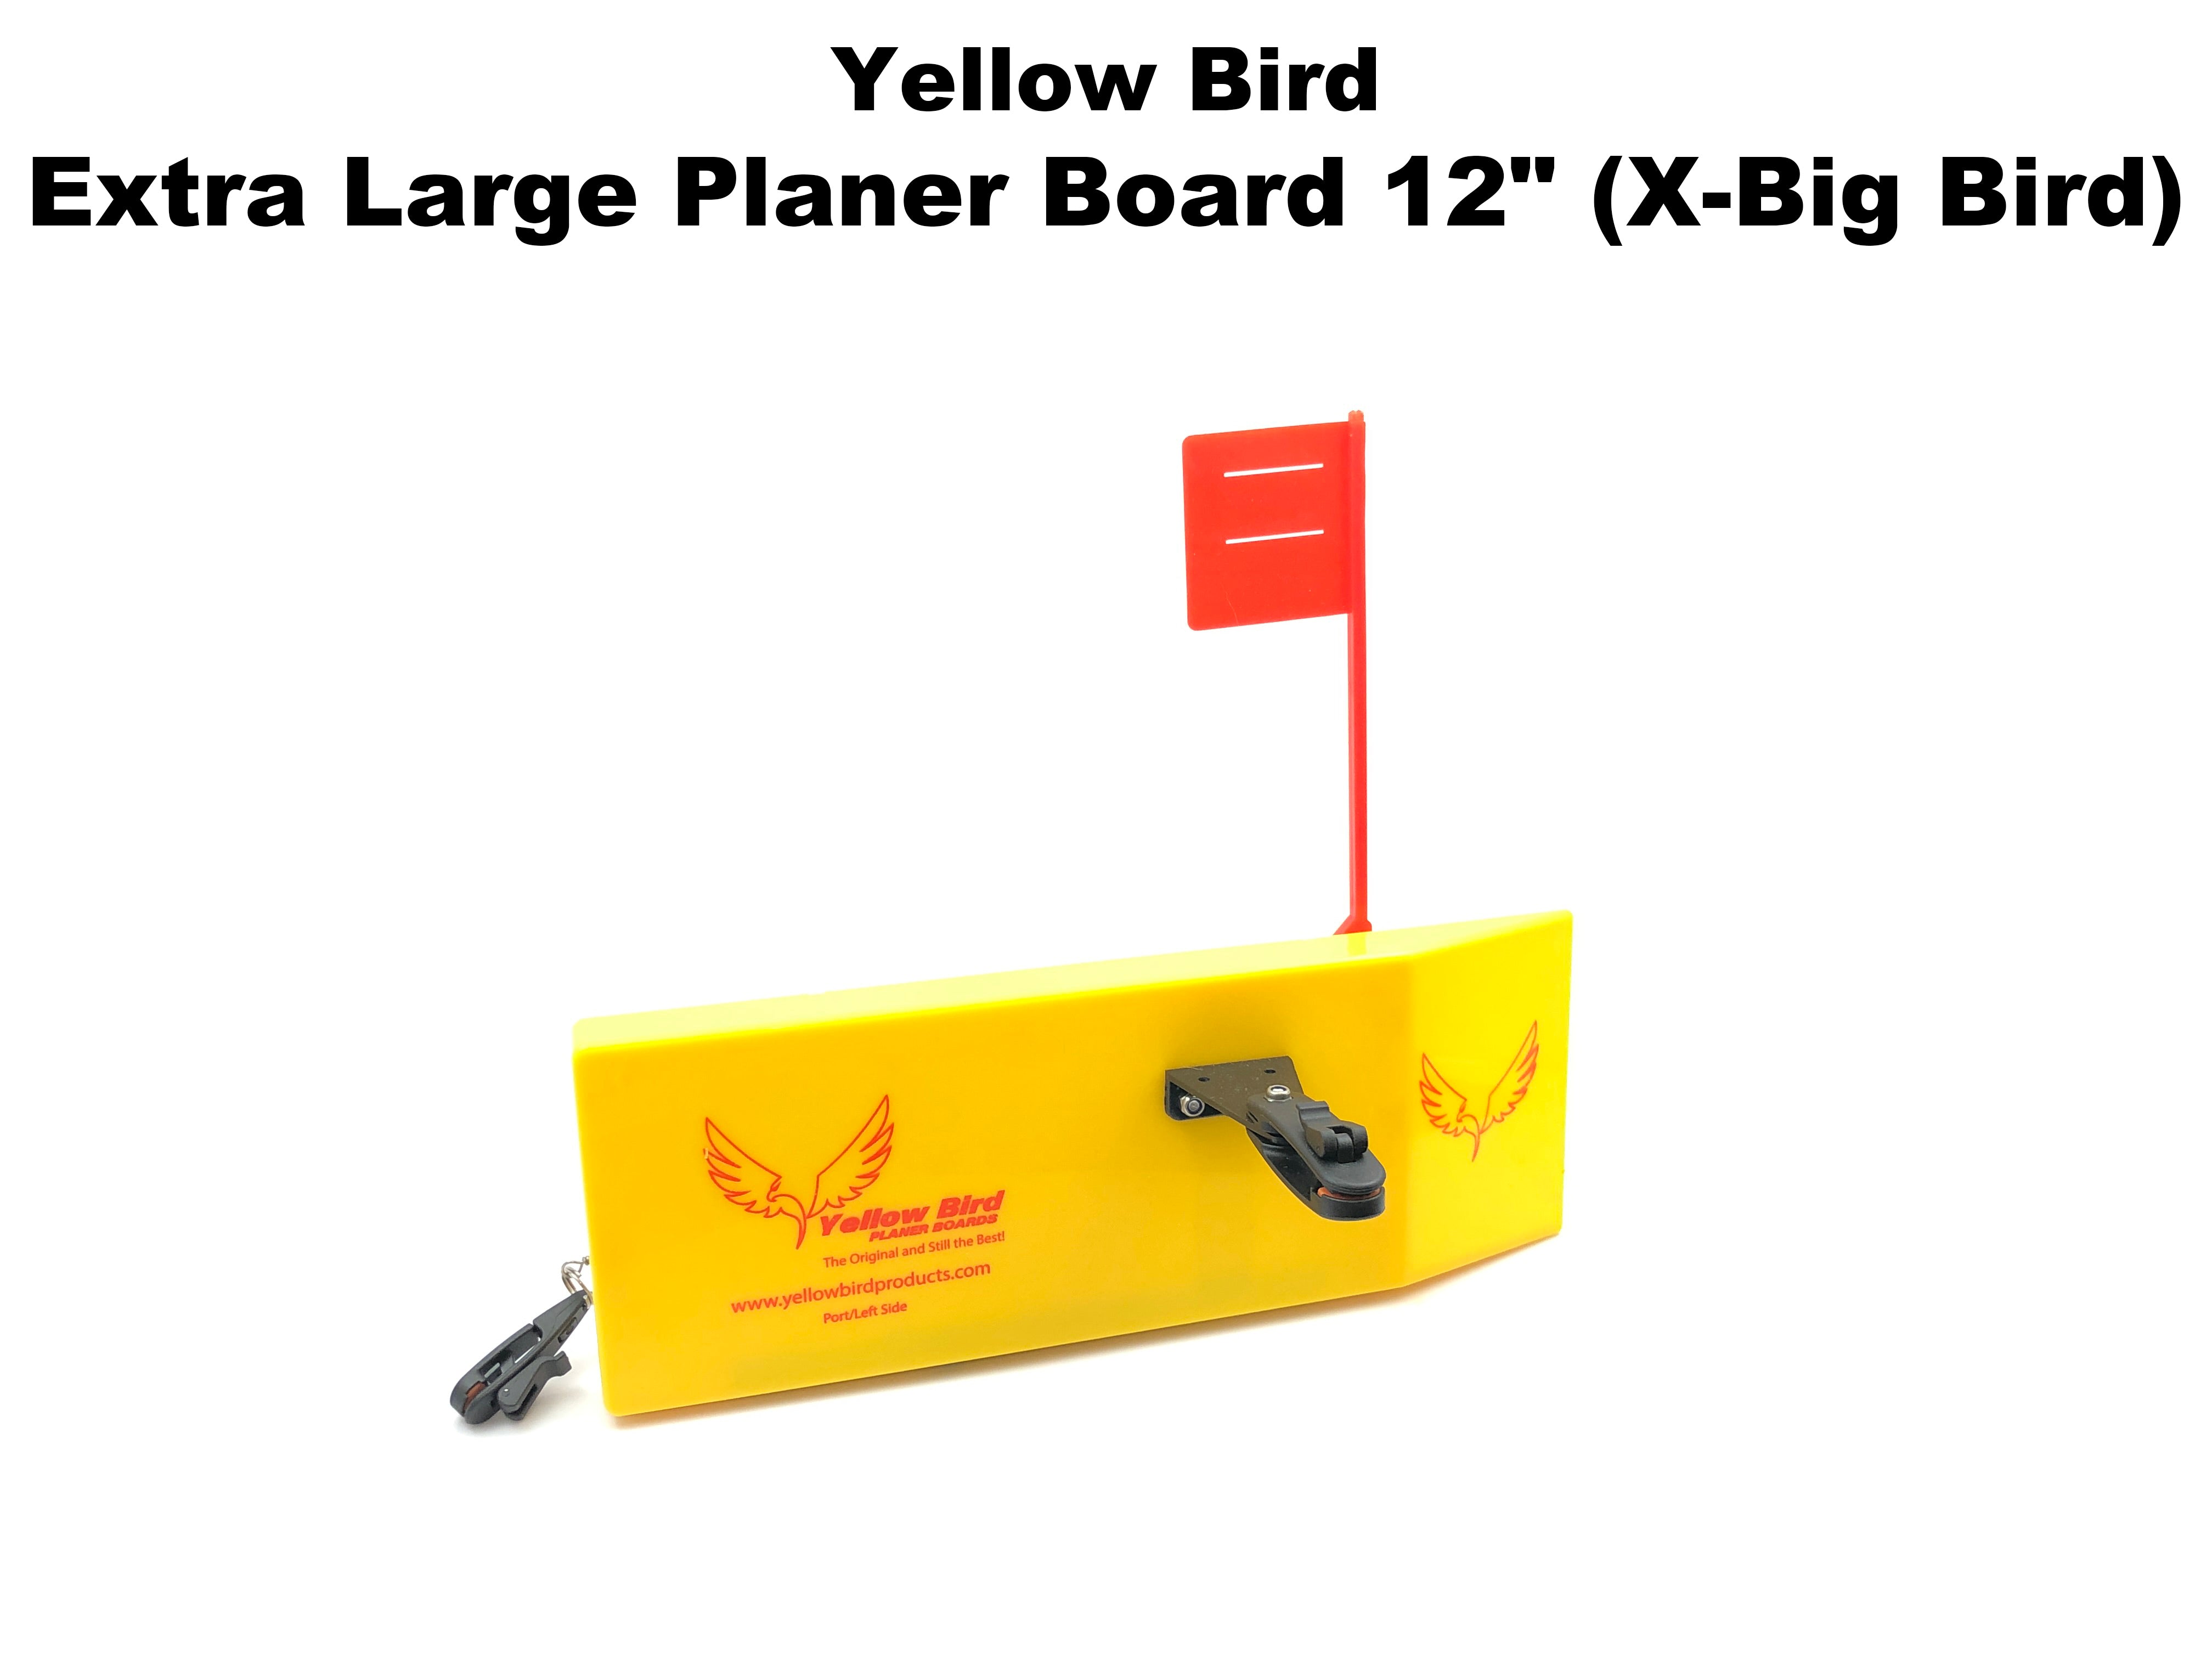  Yellow Bird Fishing Products Totally Redesigned New 12 Extra  Large Planer Board (700S Starboard Side Board with Working Tattle Flag,  Enclosed Back, Adjust Weight & (2) New Quick Grip Snap Releases) 